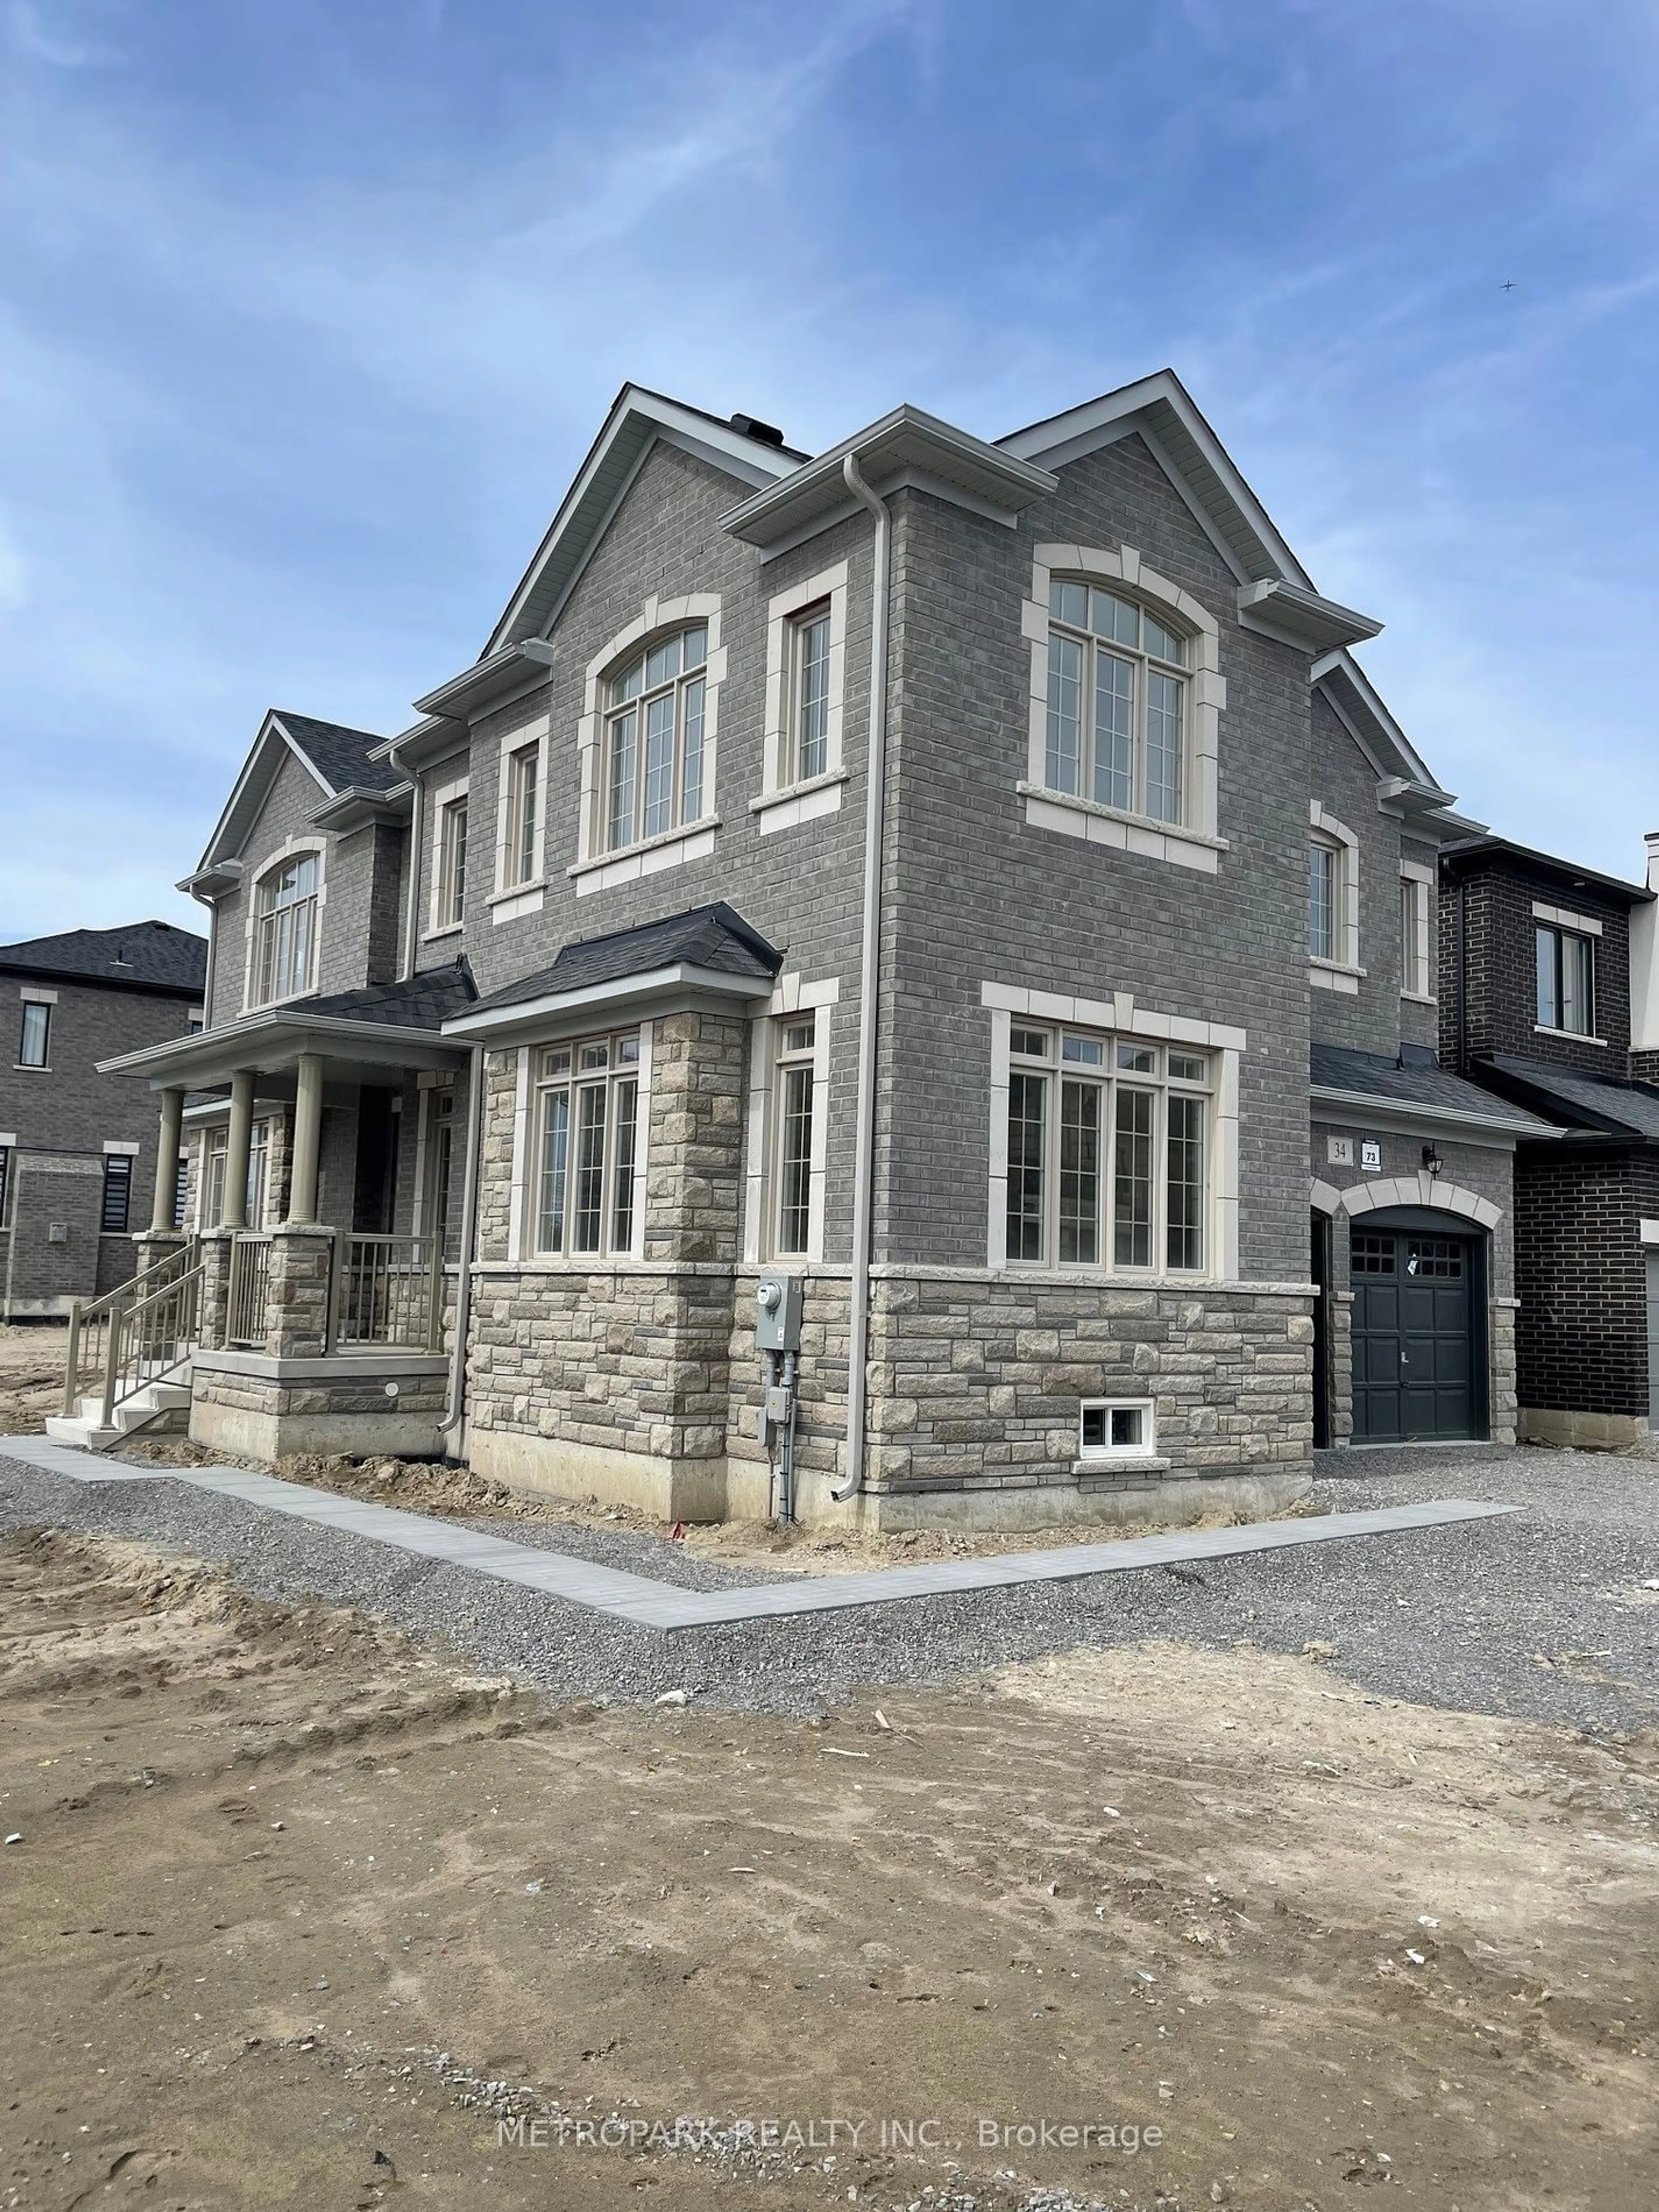 Home with brick exterior material for 34 Current Dr, Richmond Hill Ontario L4S 0M9